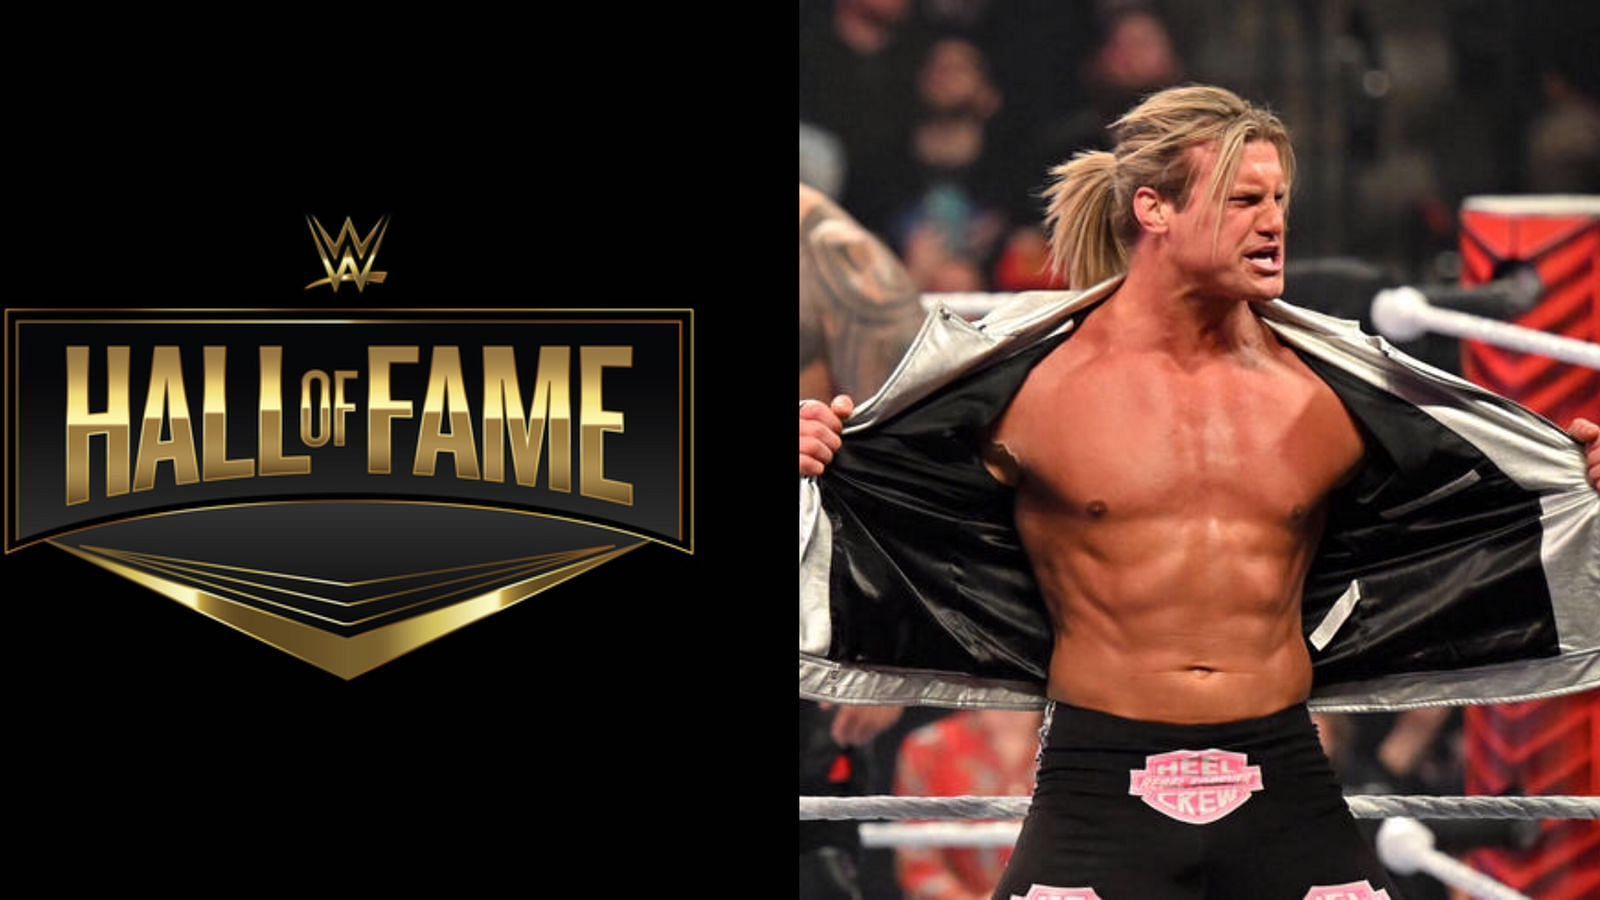 Dolph Ziggler was recently let go by the WWE